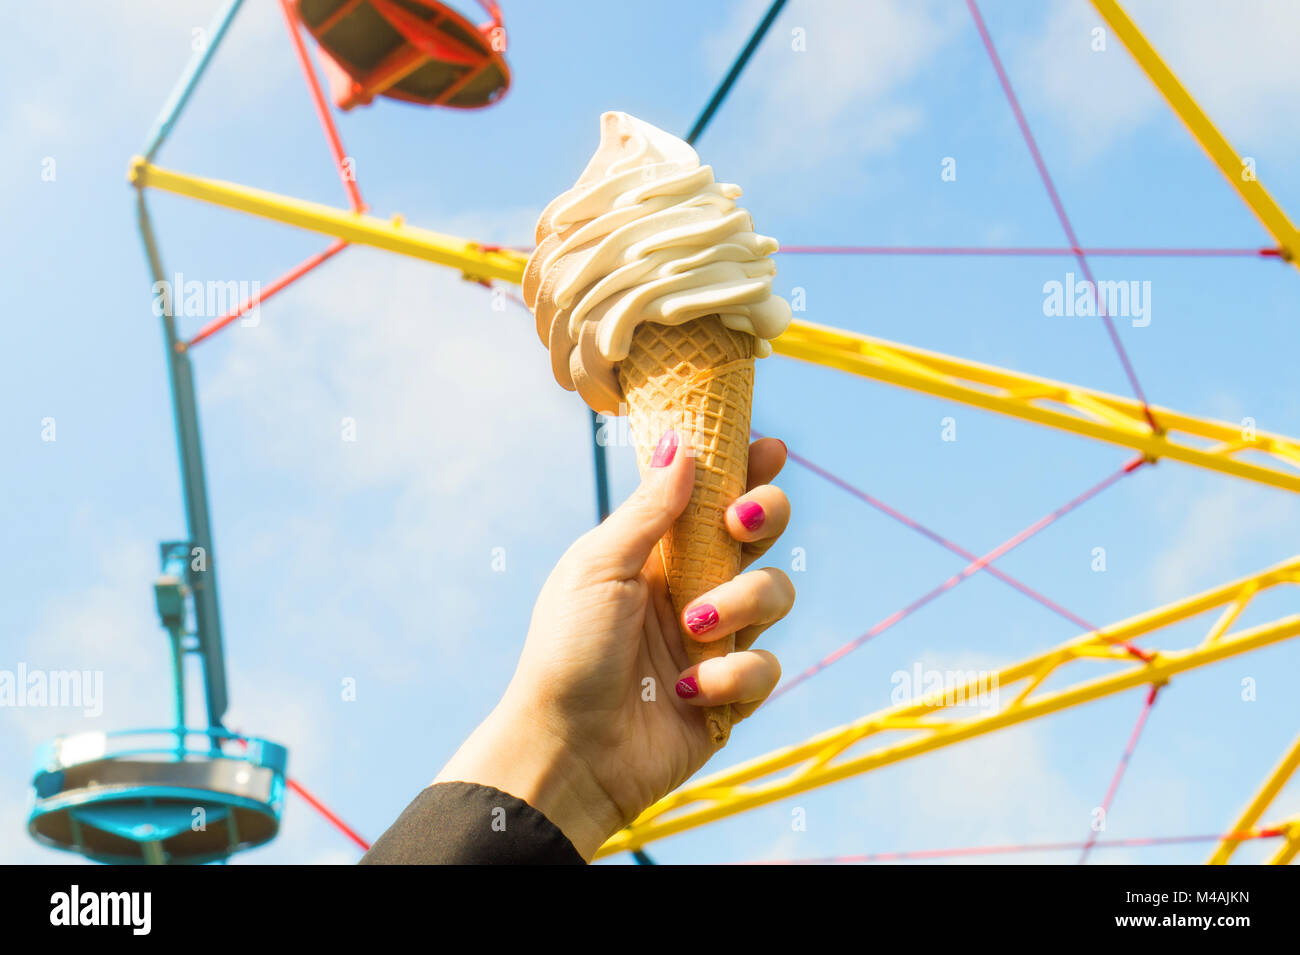 Ice cream in amusement park on a sunny summer day. Girl or young woman holding a cone of soft ice with a colorful theme park ride in the background. Stock Photo